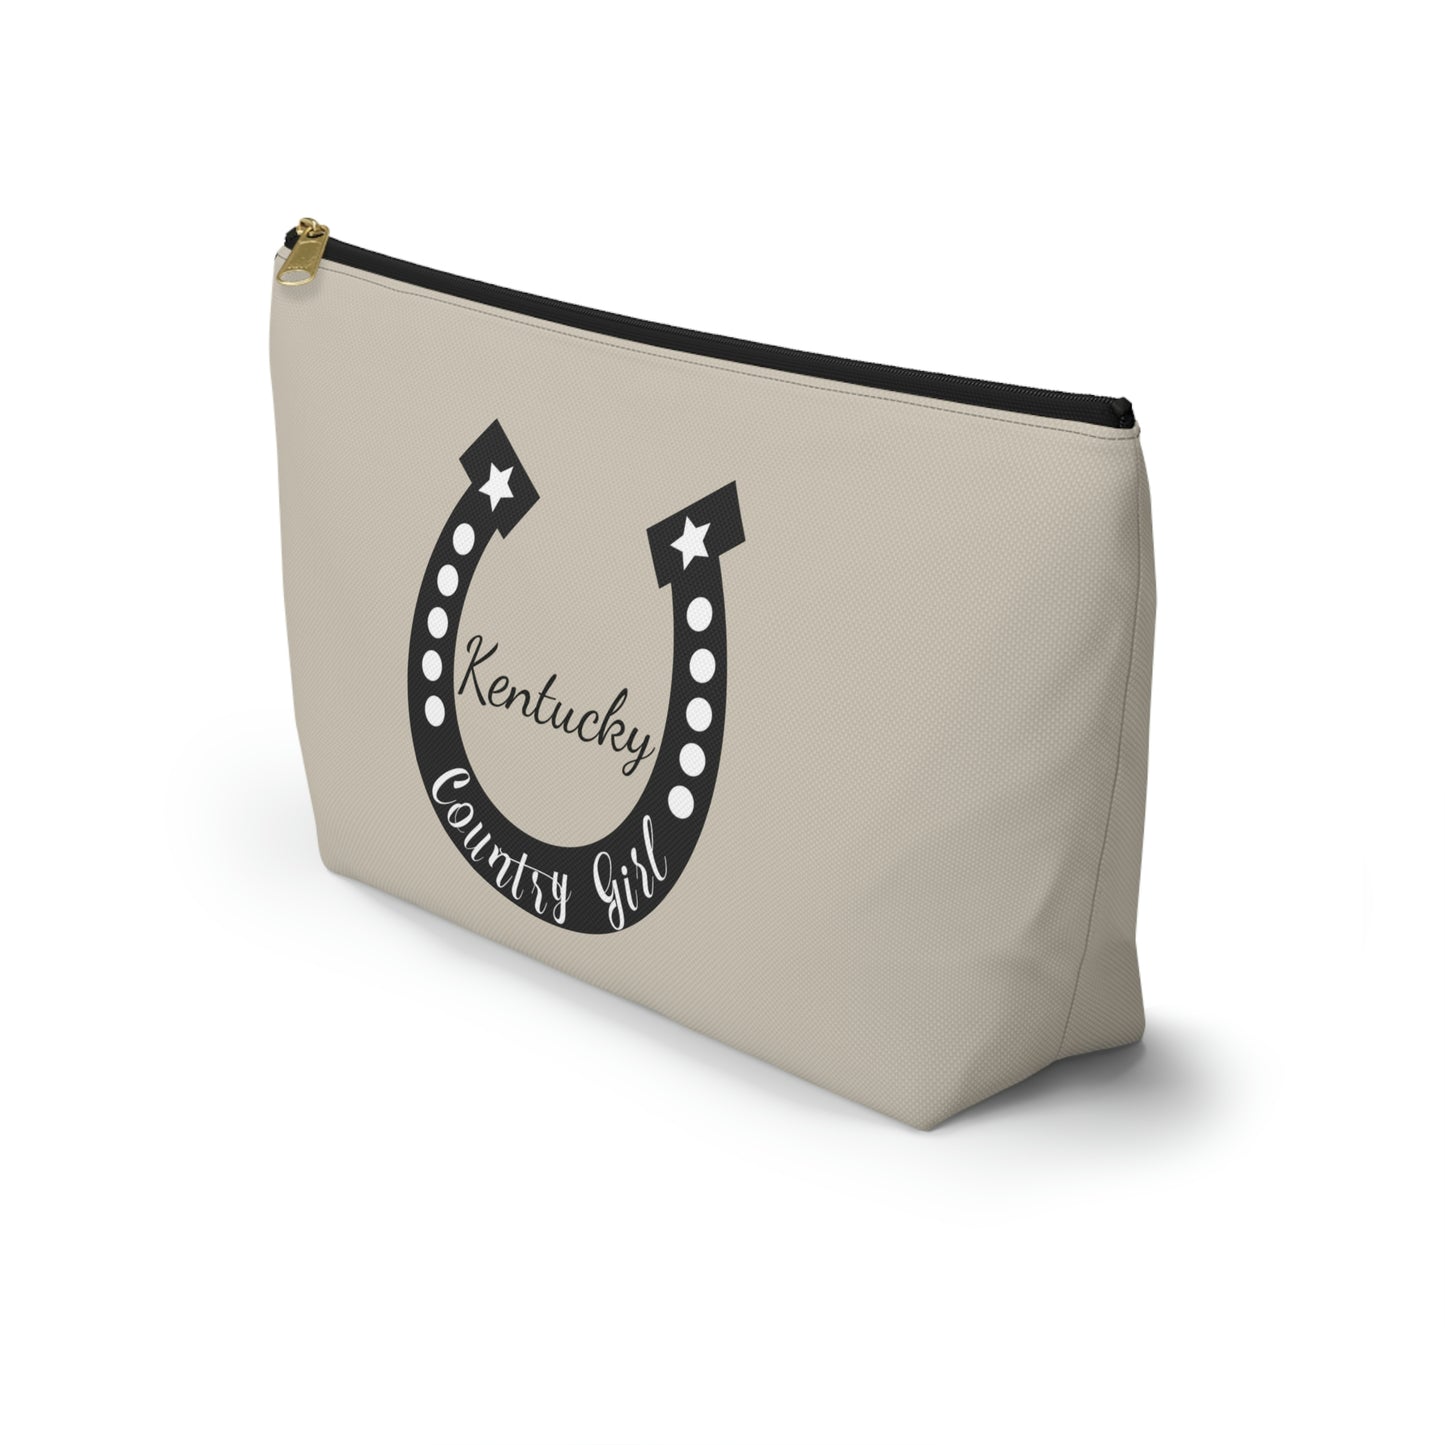 Personalized Horse Shoe Print Makeup Bag / Country Girl Cosmetic Bag